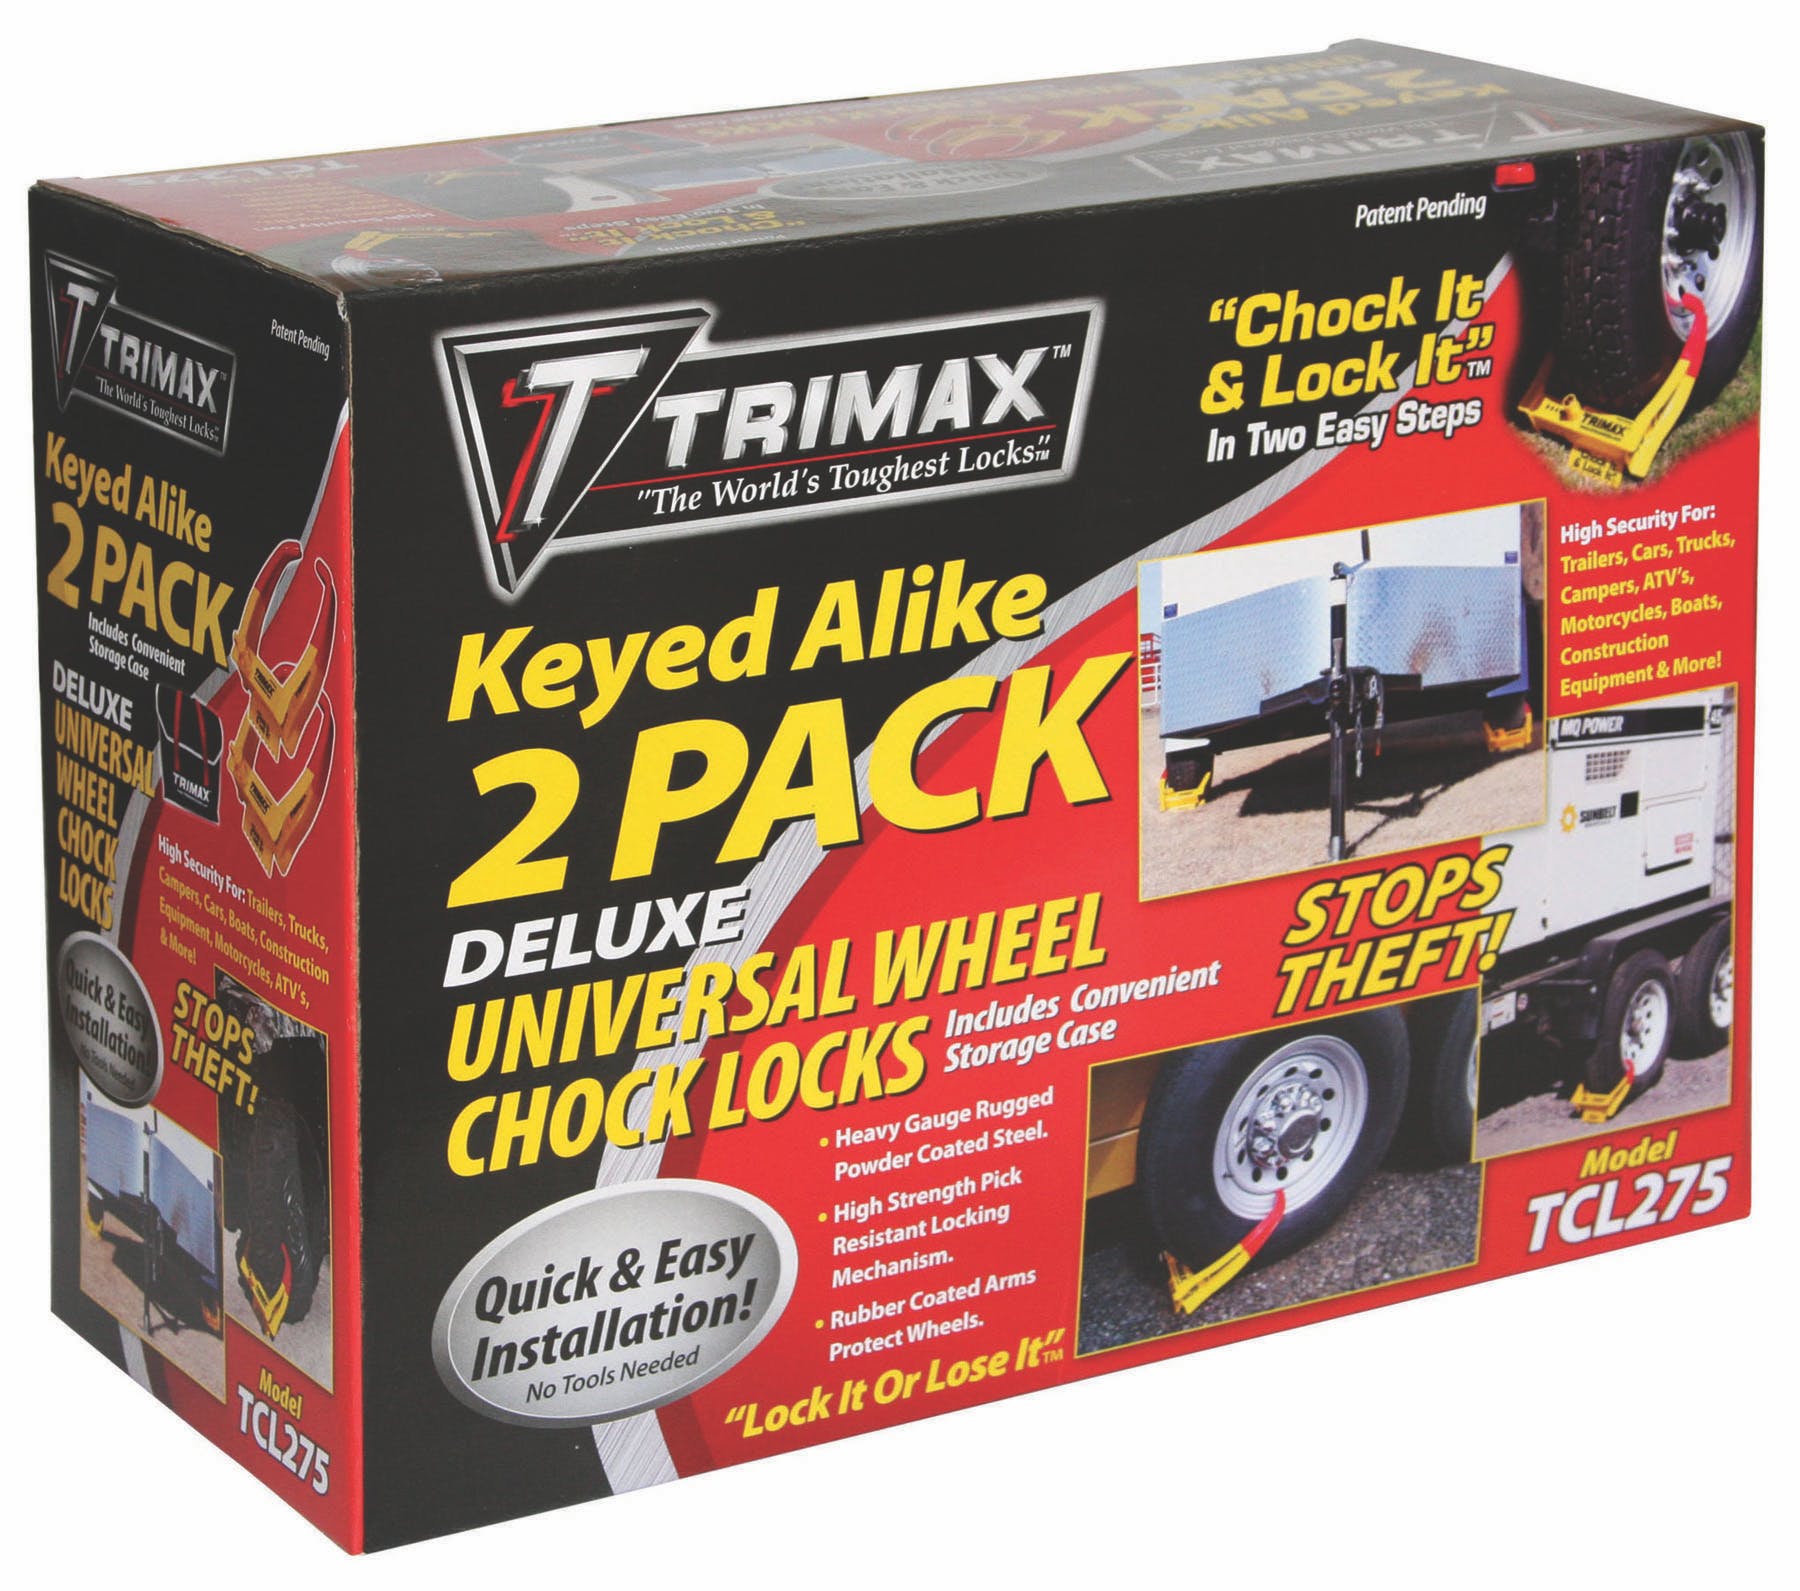 TRIMAX TCL275 Deluxe Wheel Chock Lock Keyed Alike Two Pack-Large